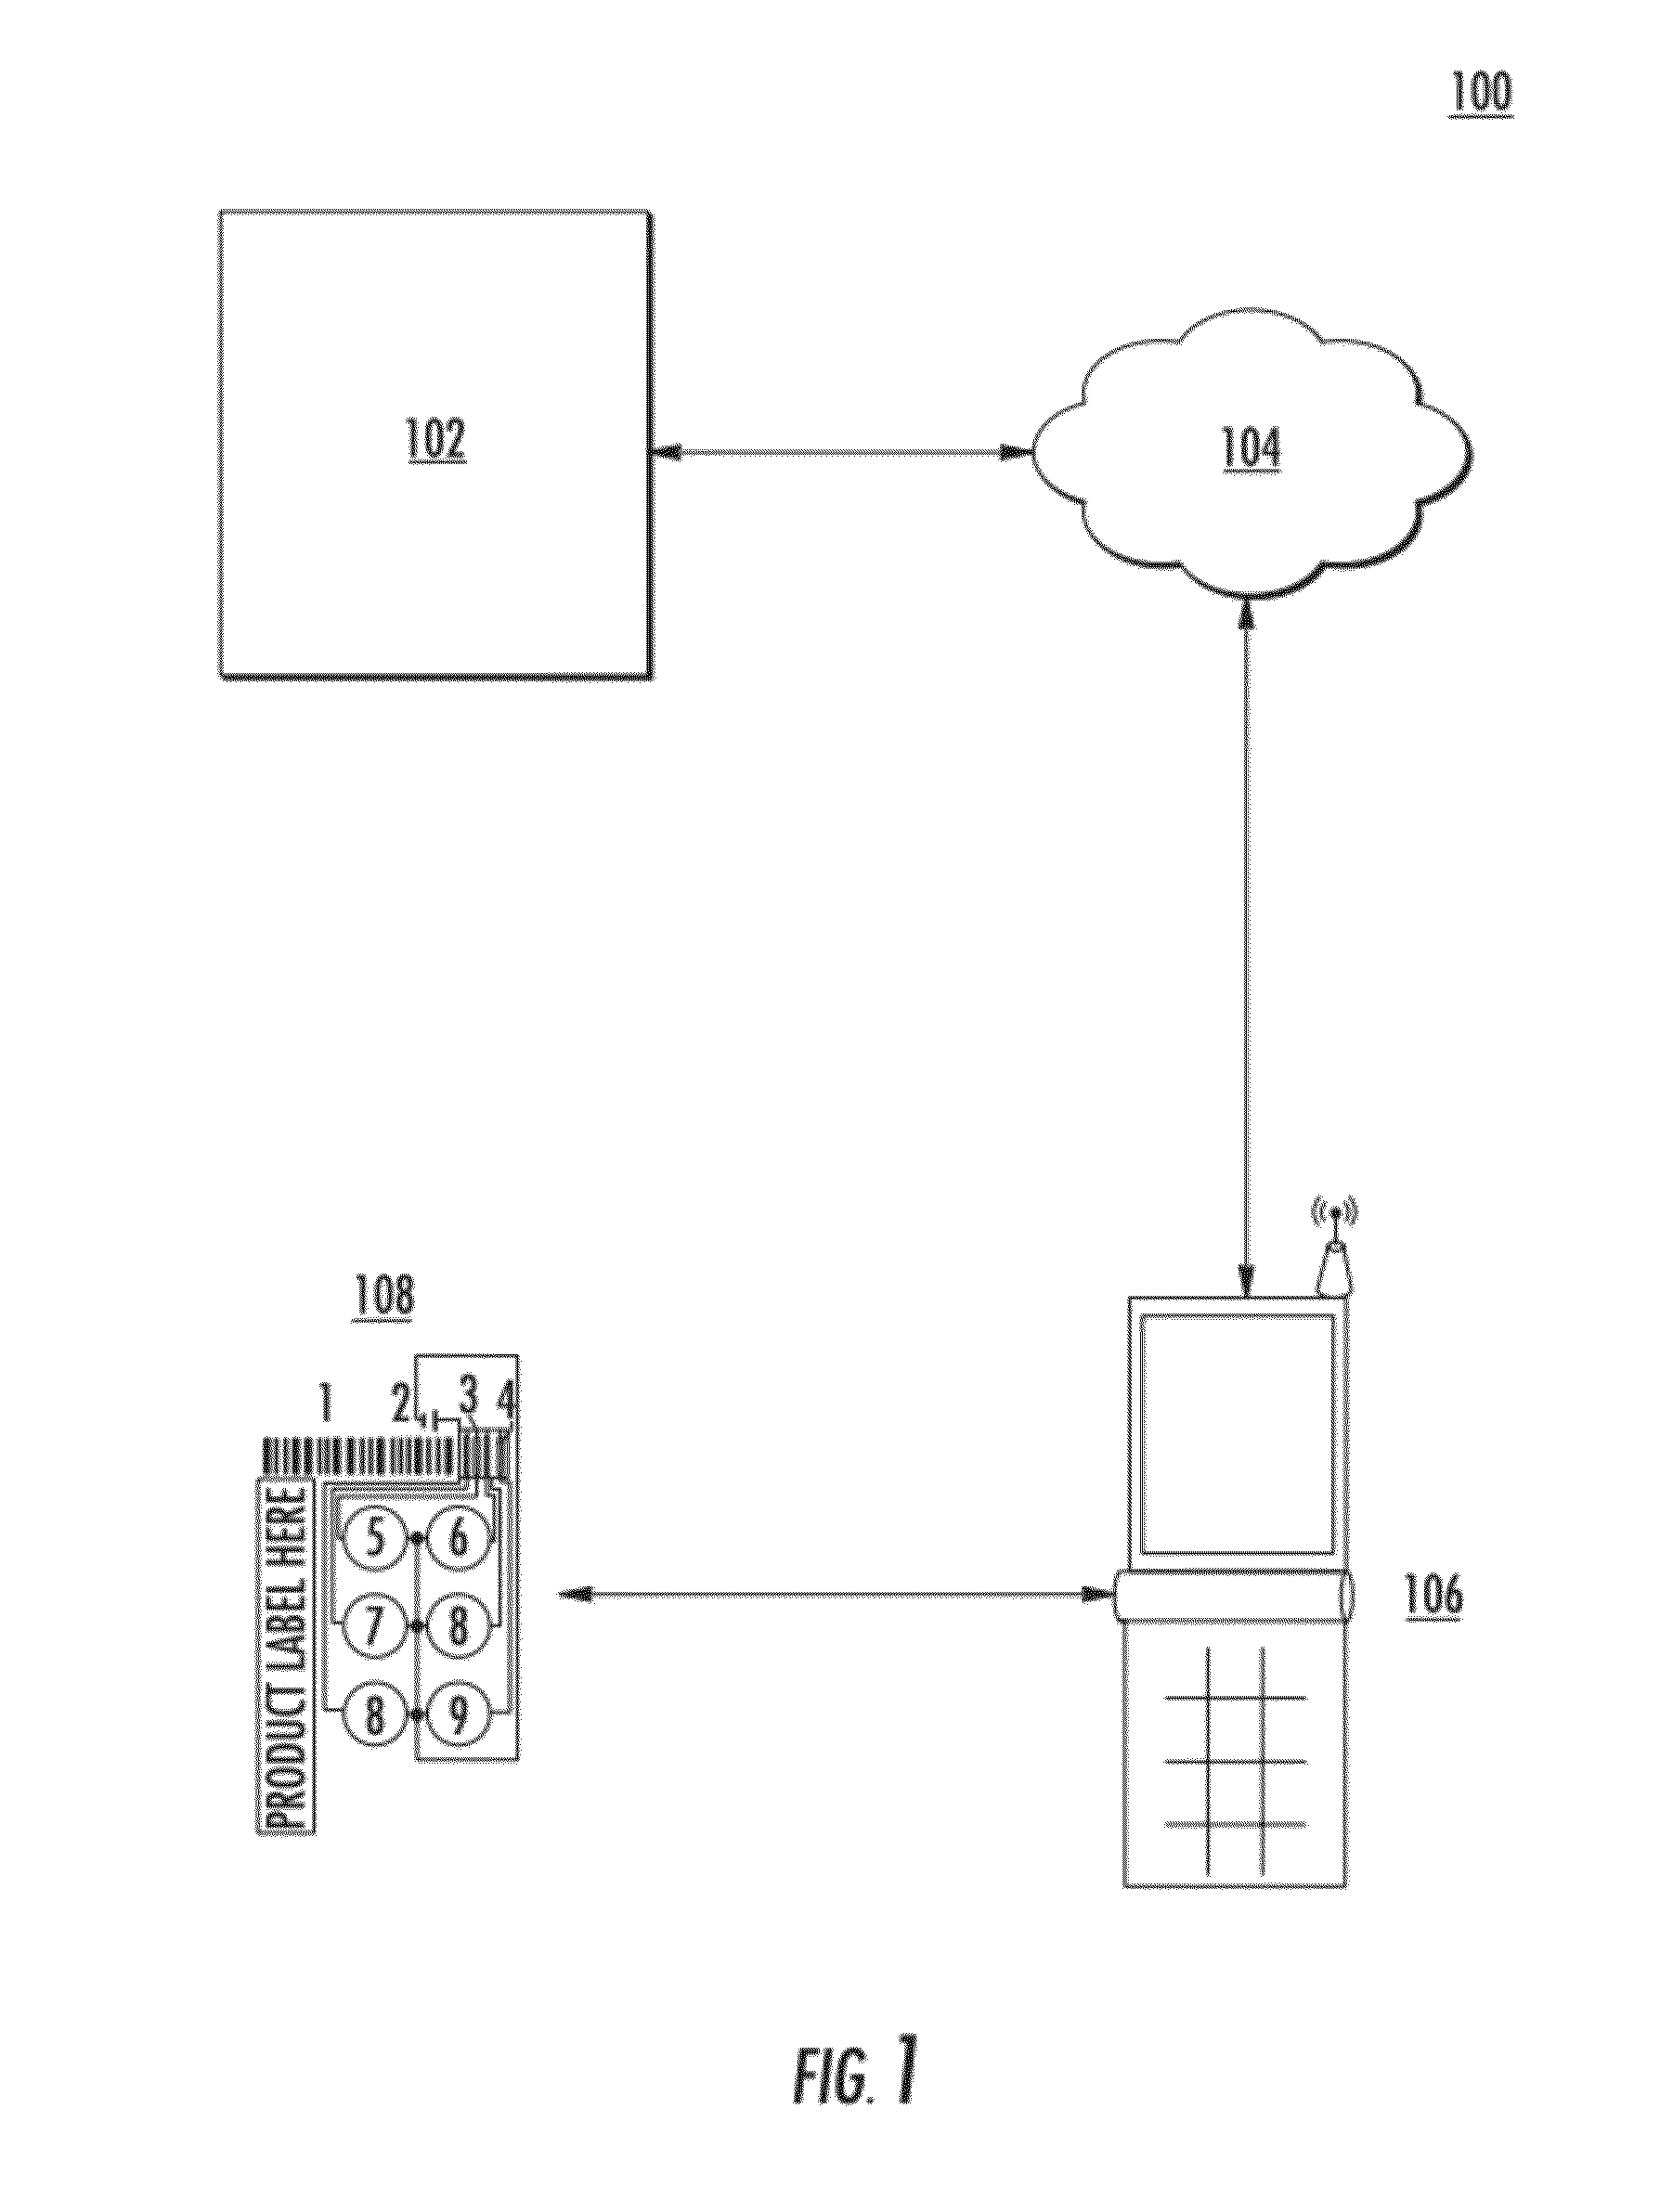 System and method for automating and verifying product value, usage, and suitability for use or sale